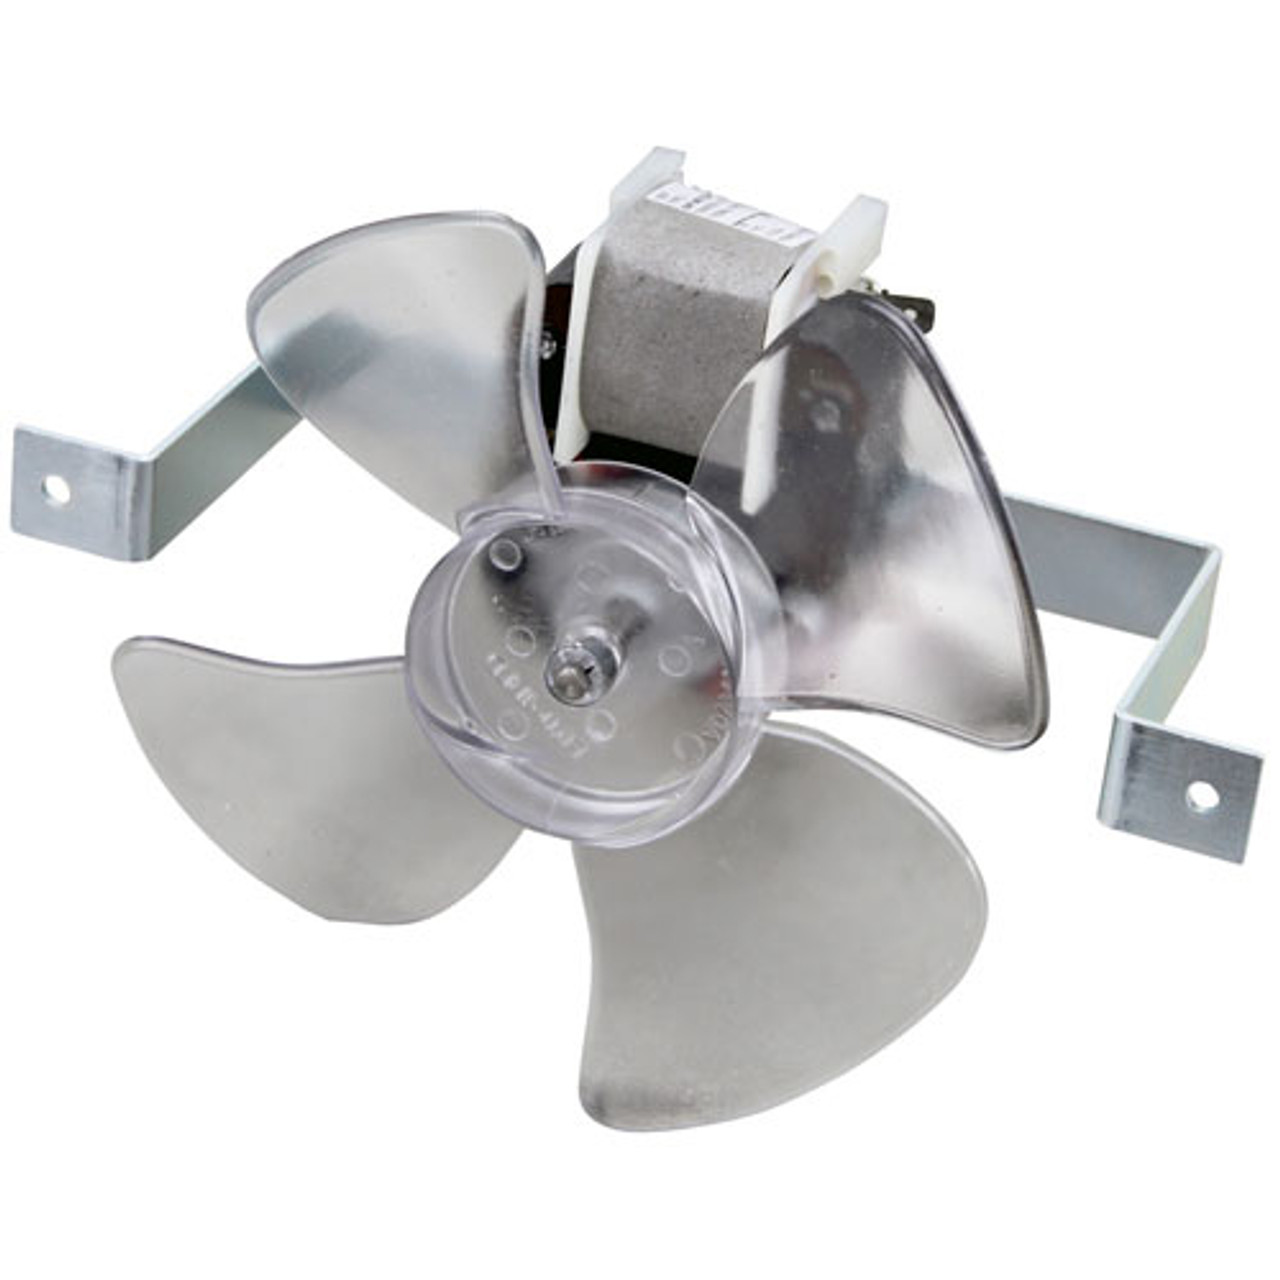 Fan Motor - Replacement Part For McCall 91817P